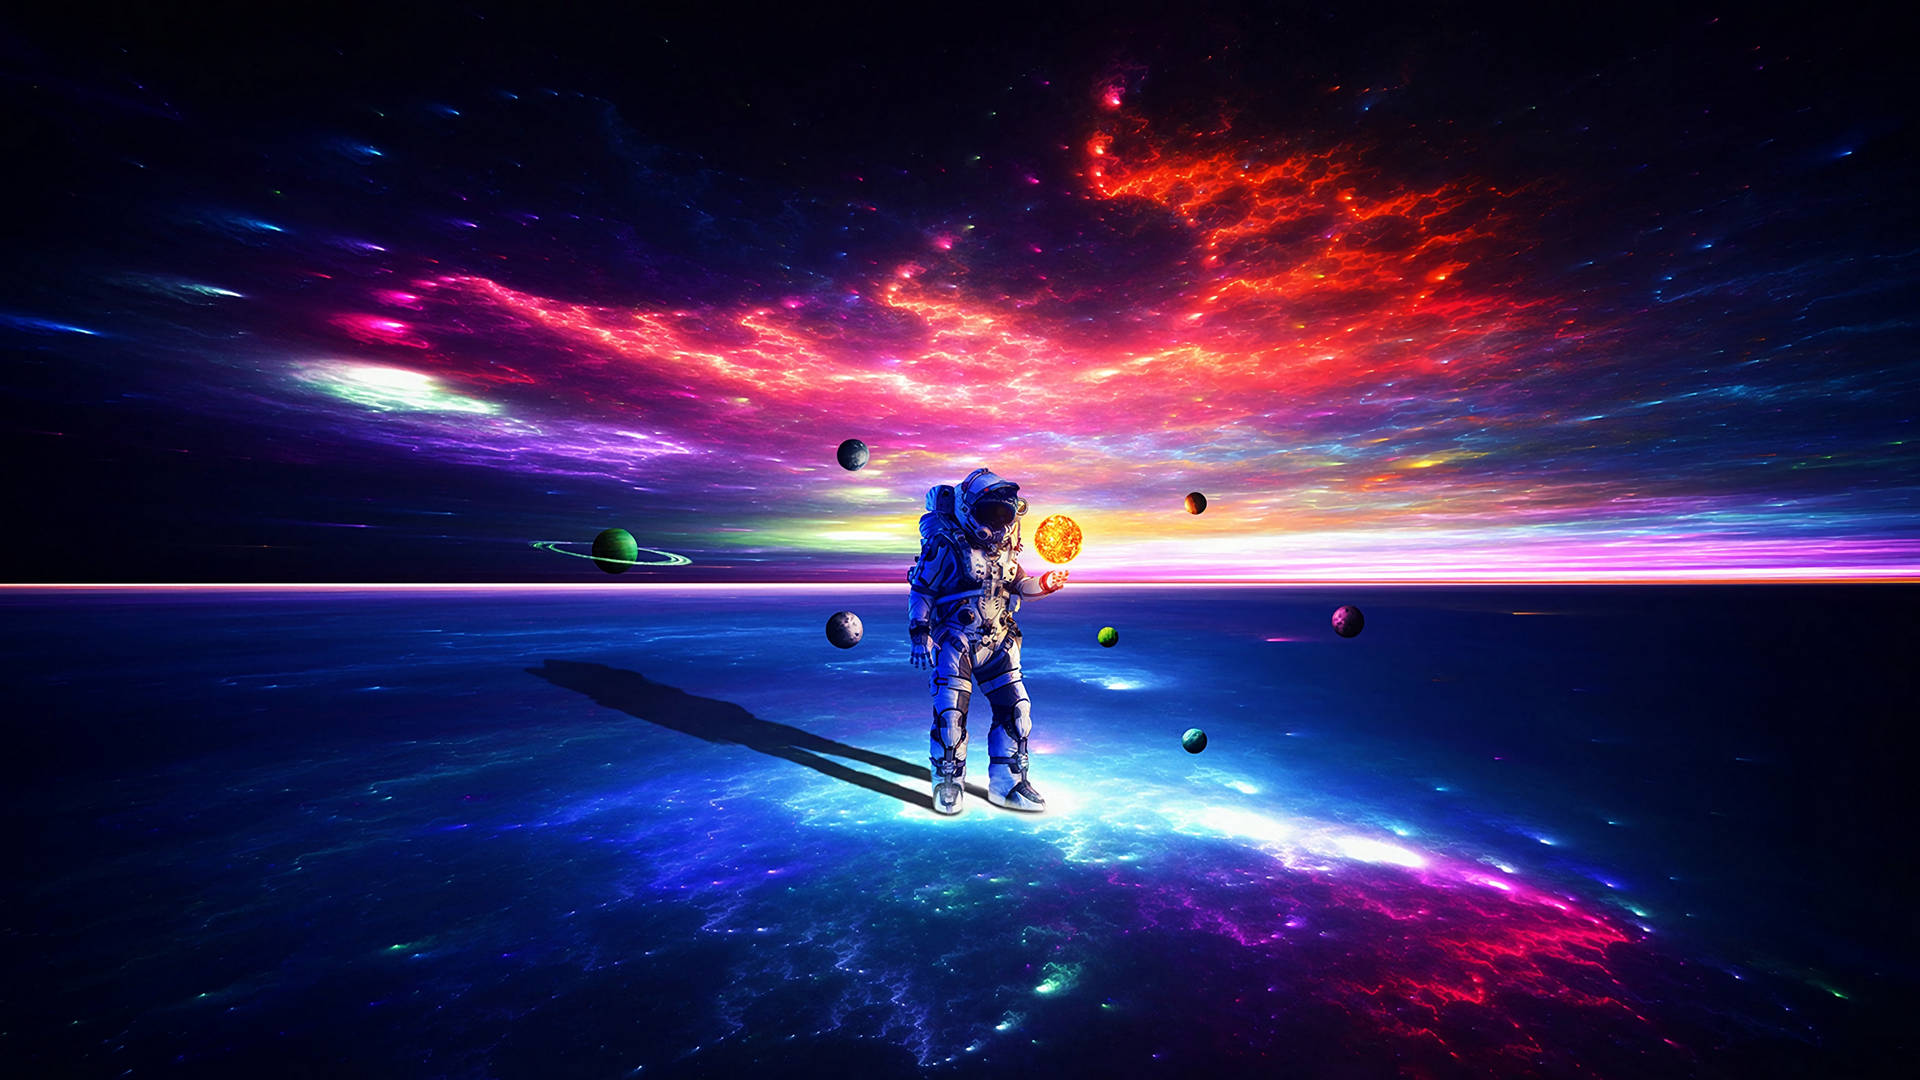 Astronaut In The Cosmos